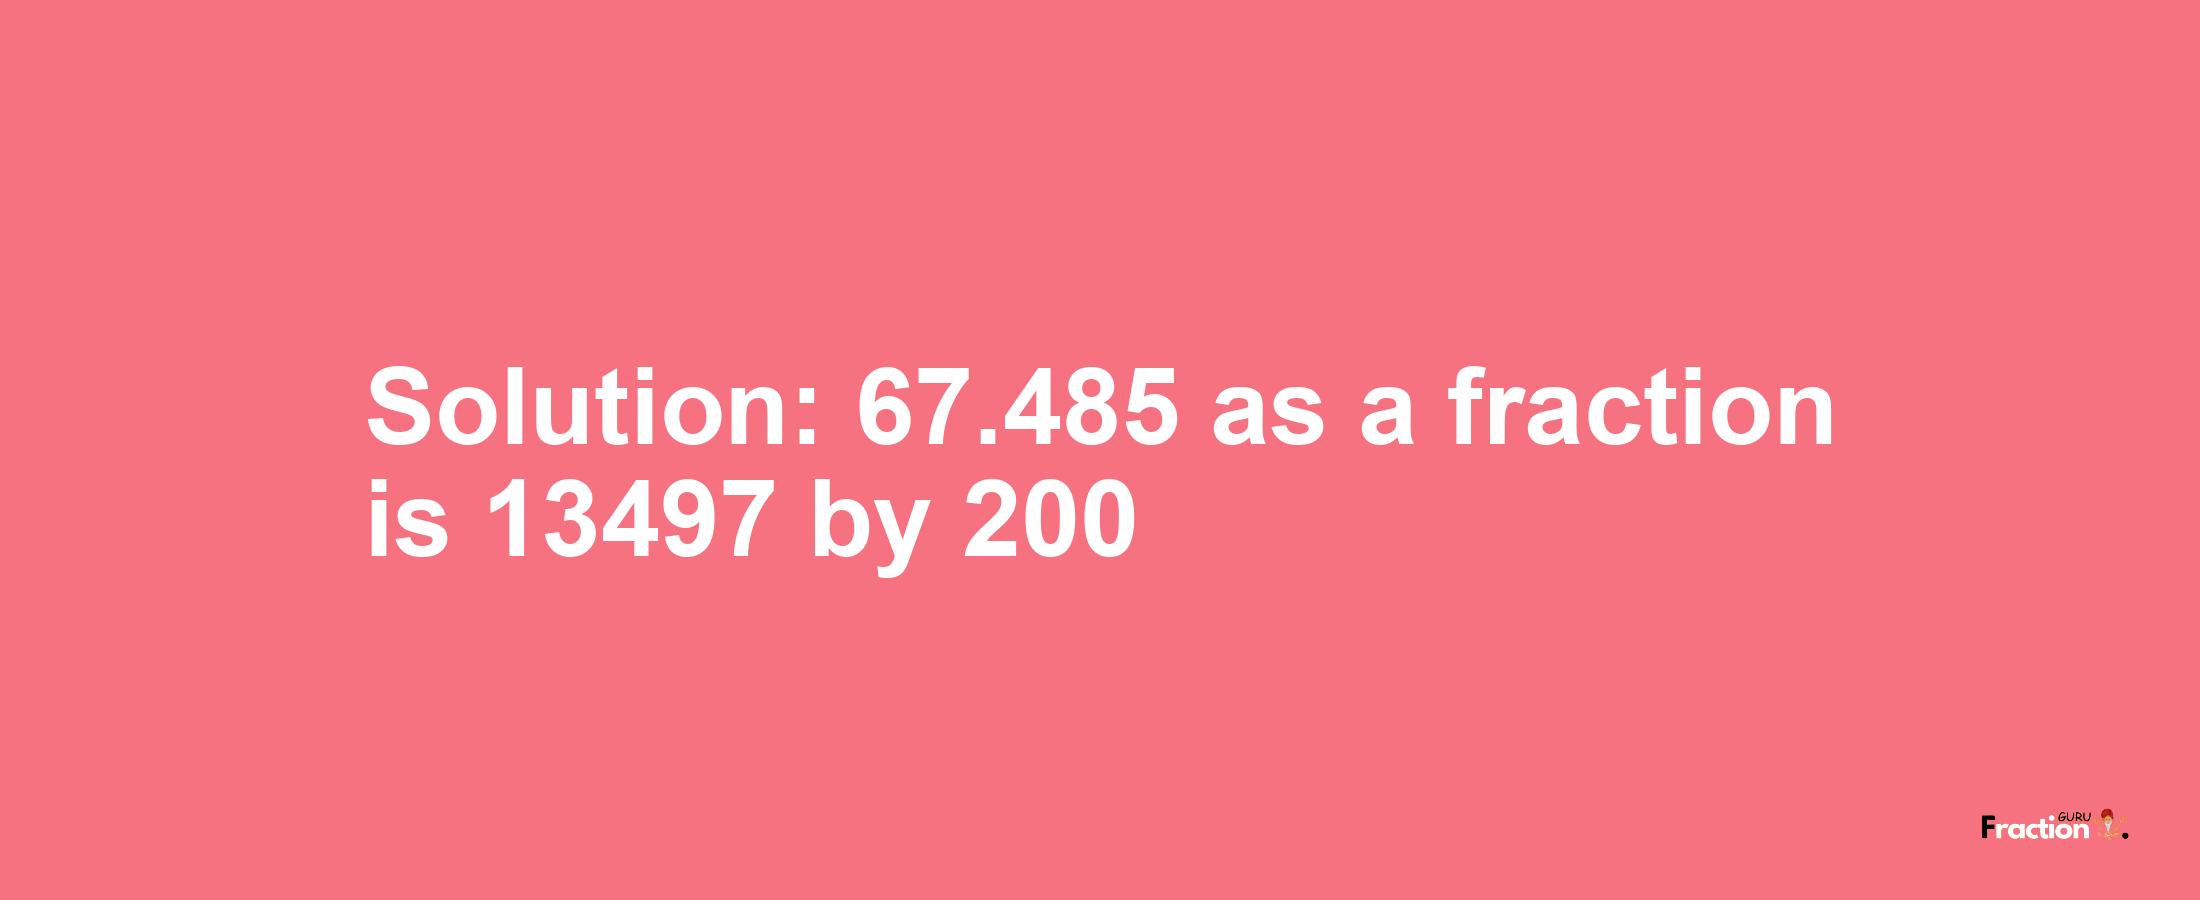 Solution:67.485 as a fraction is 13497/200